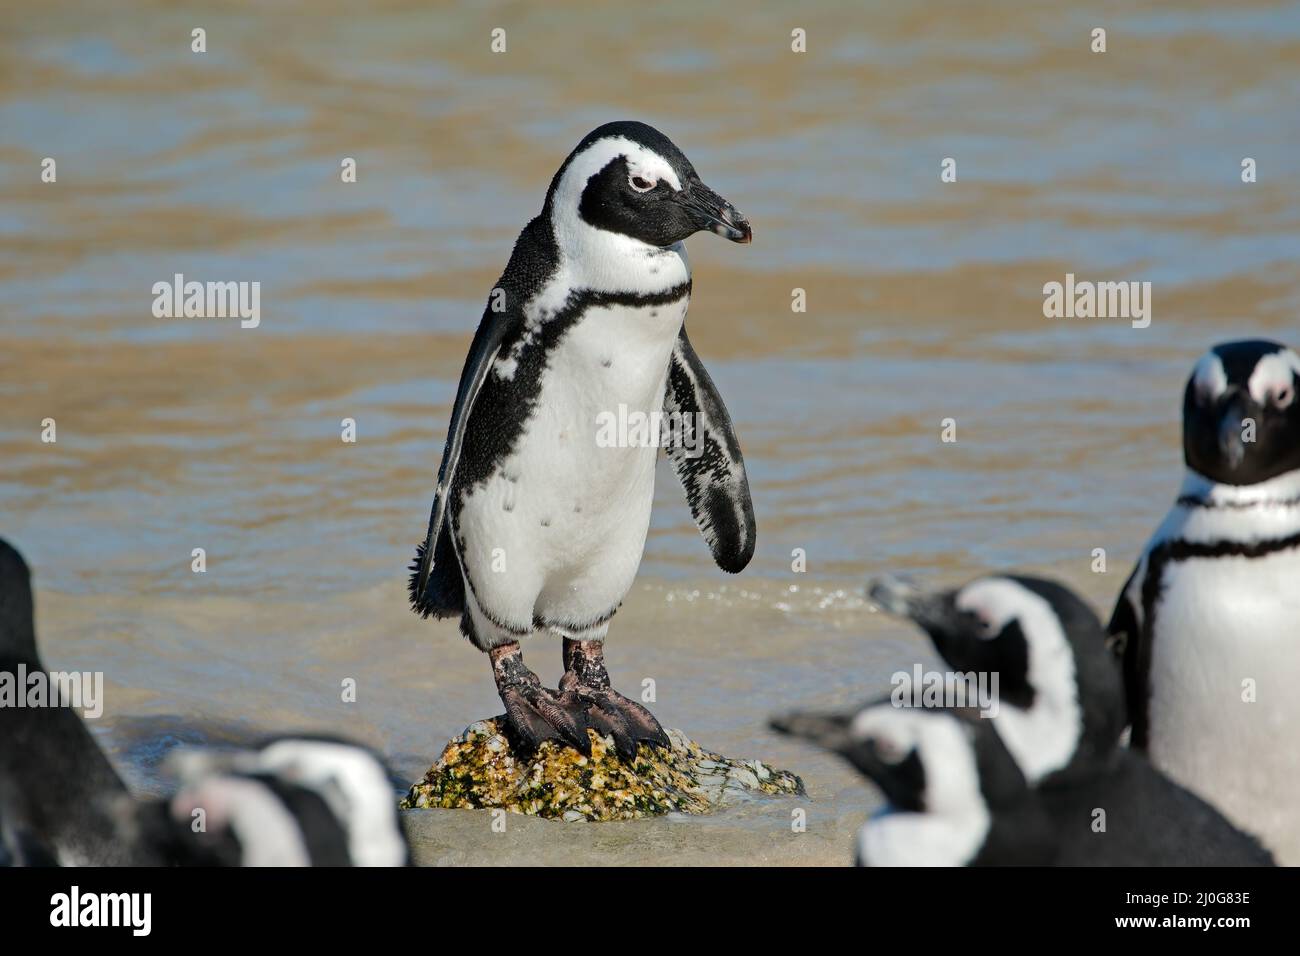 An African penguin (Spheniscus demersus) standing on coastal rocks, Western Cape, South Africa Stock Photo